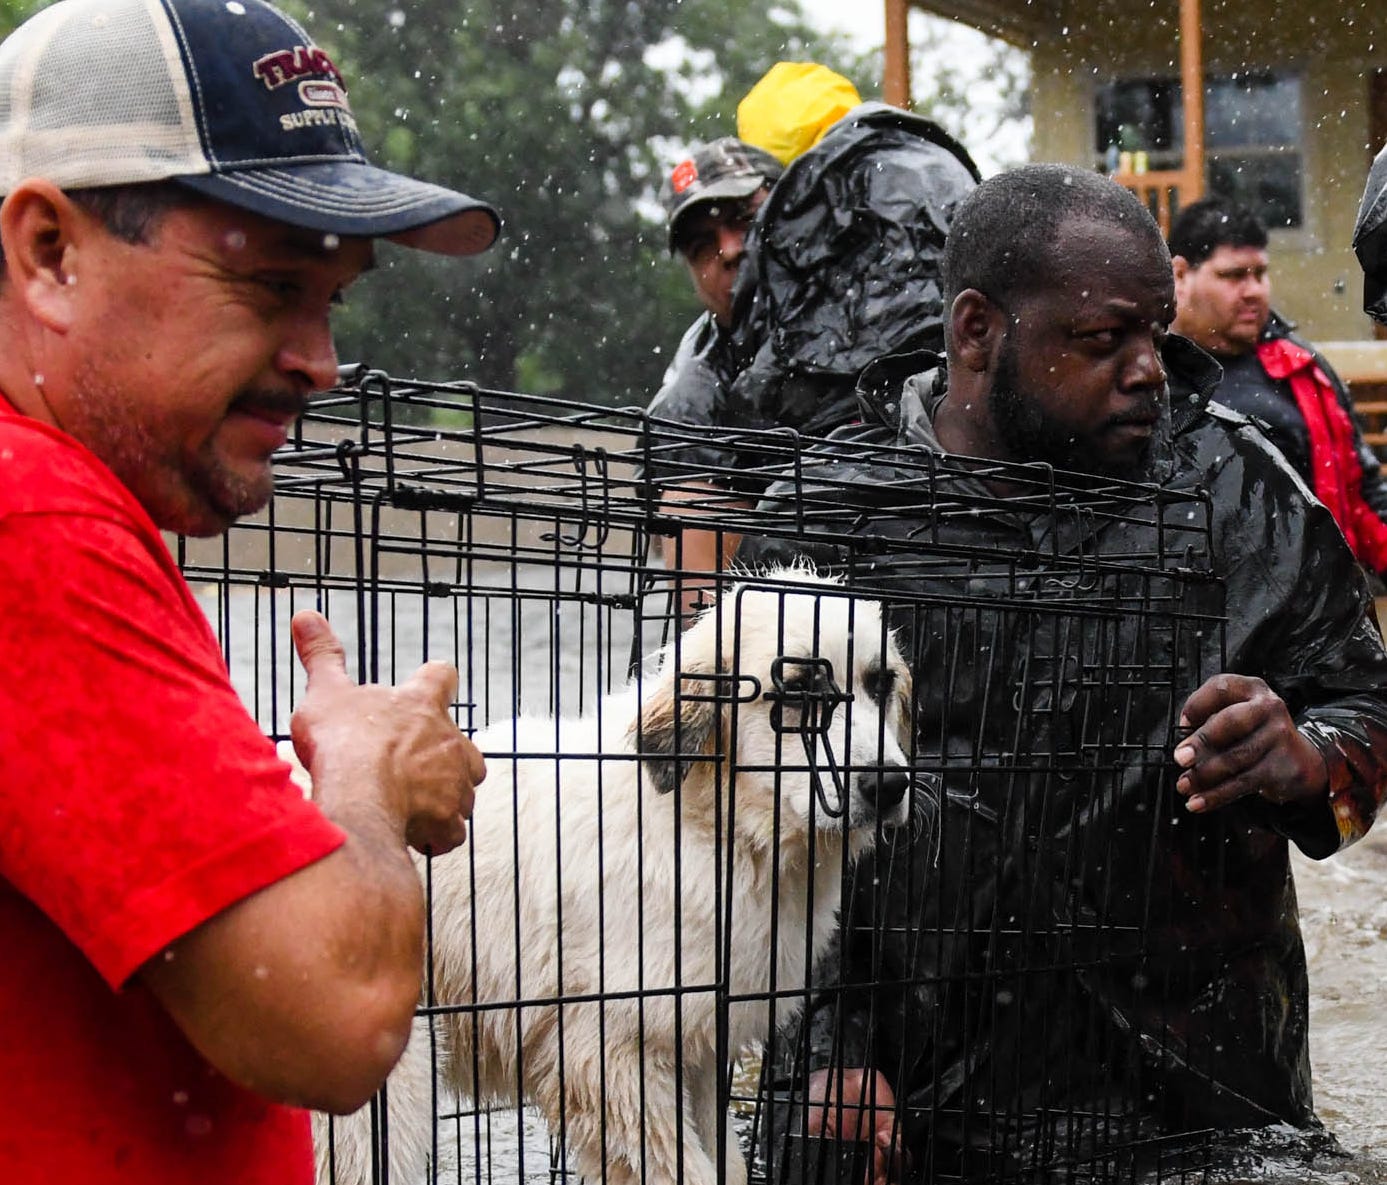 Volunteers and first responders in Lafayette, La., on Aug. 28, 2017.